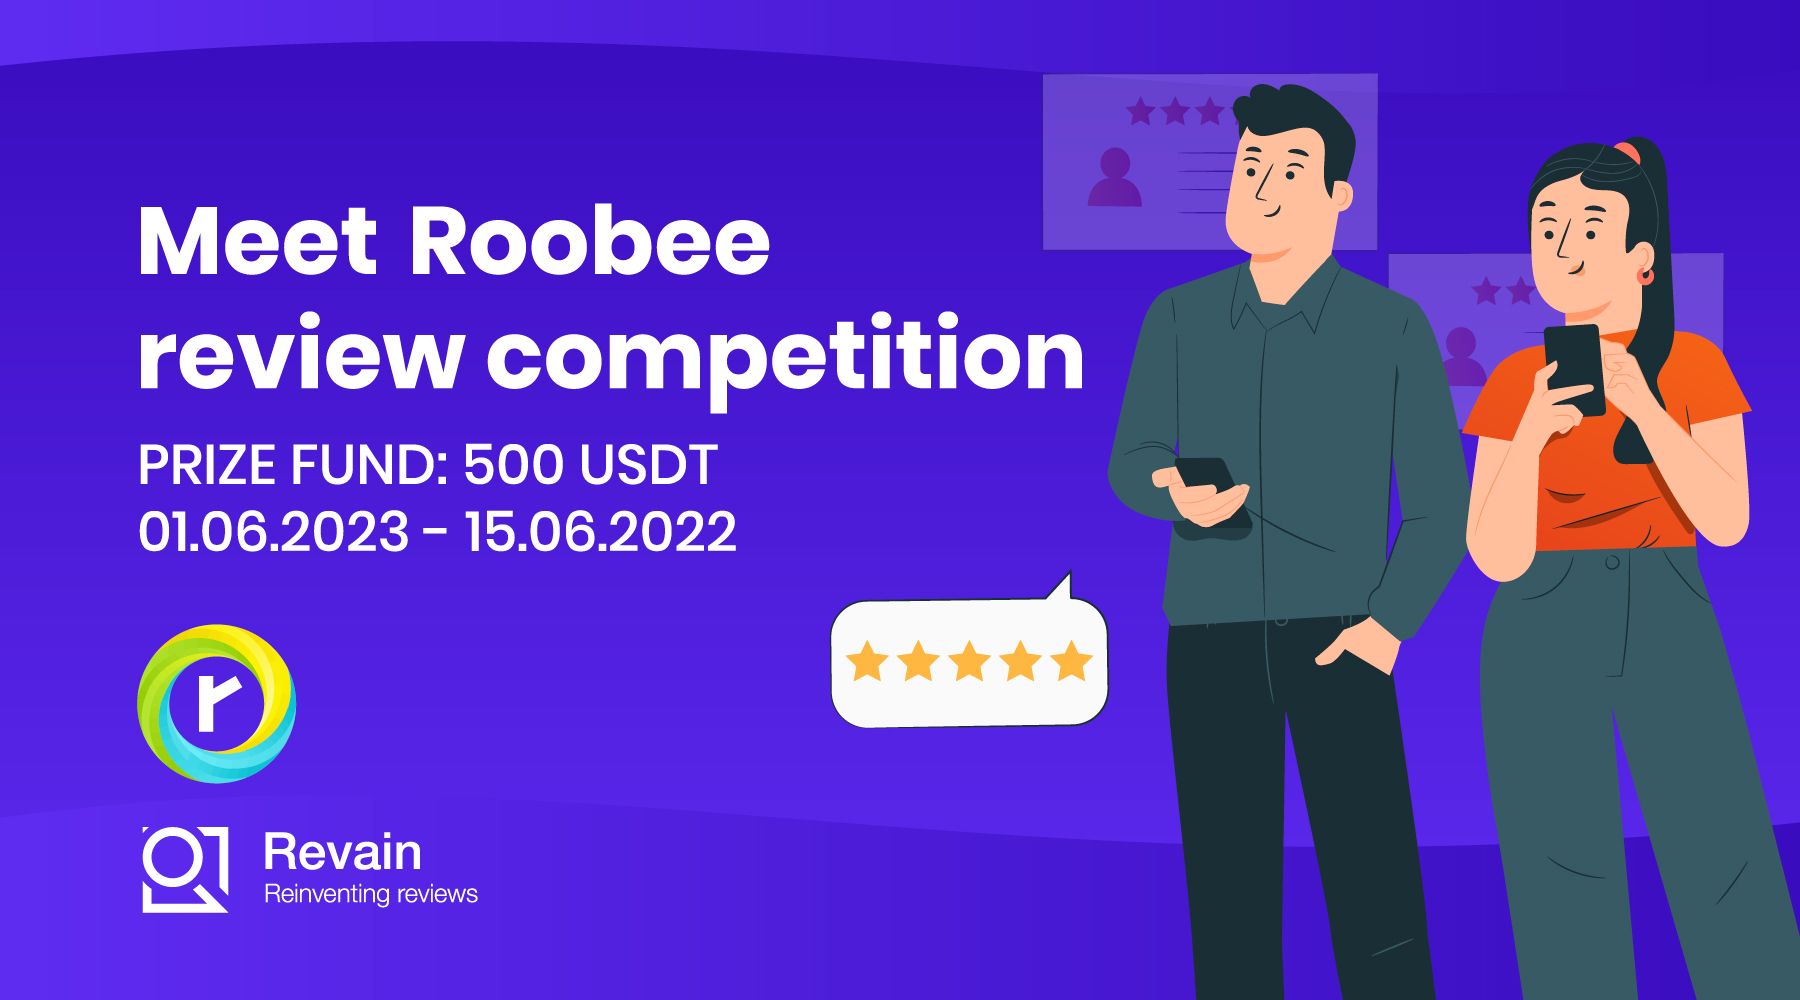 Article Meet Roobee review competition!